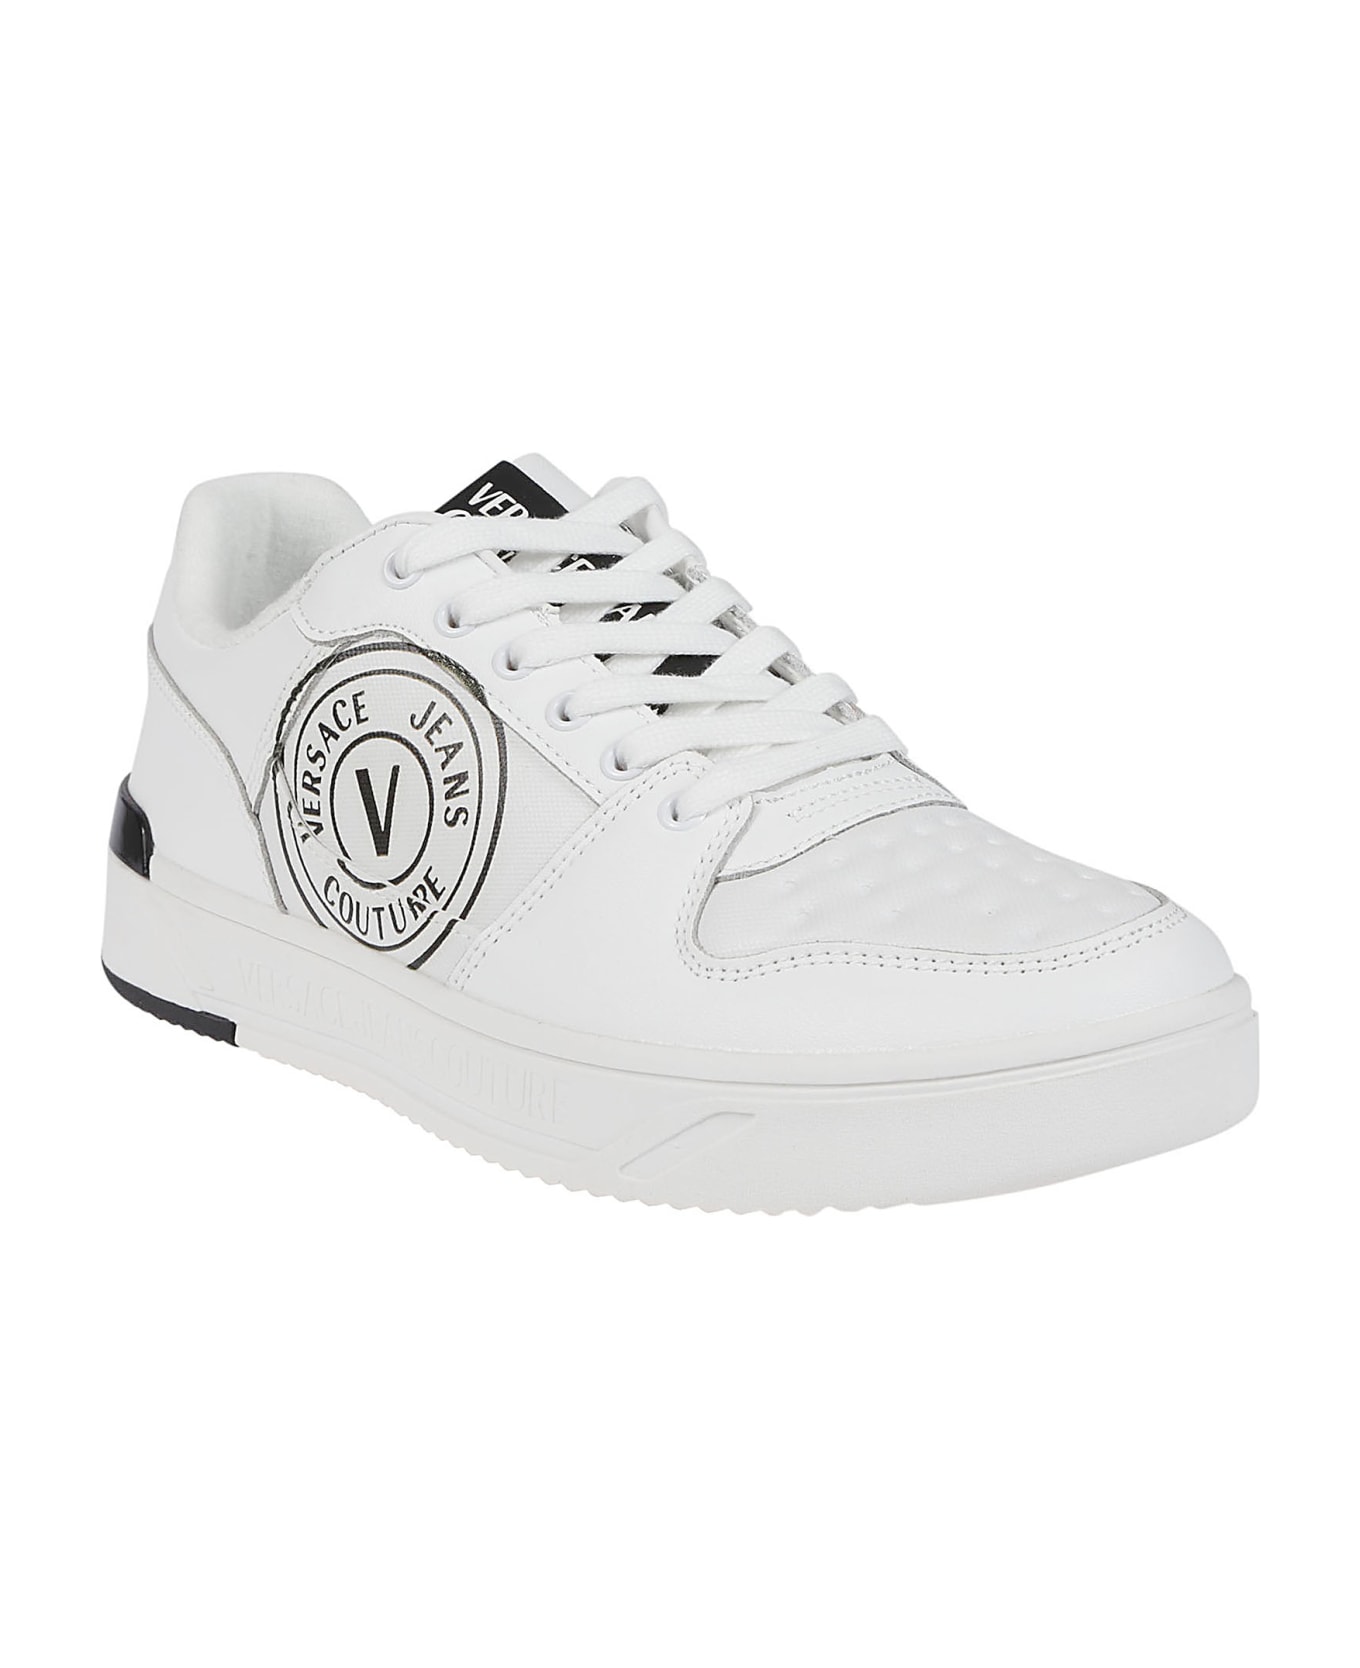 Versace Jeans Couture Starlight Sj1 Sneakers - White スニーカー